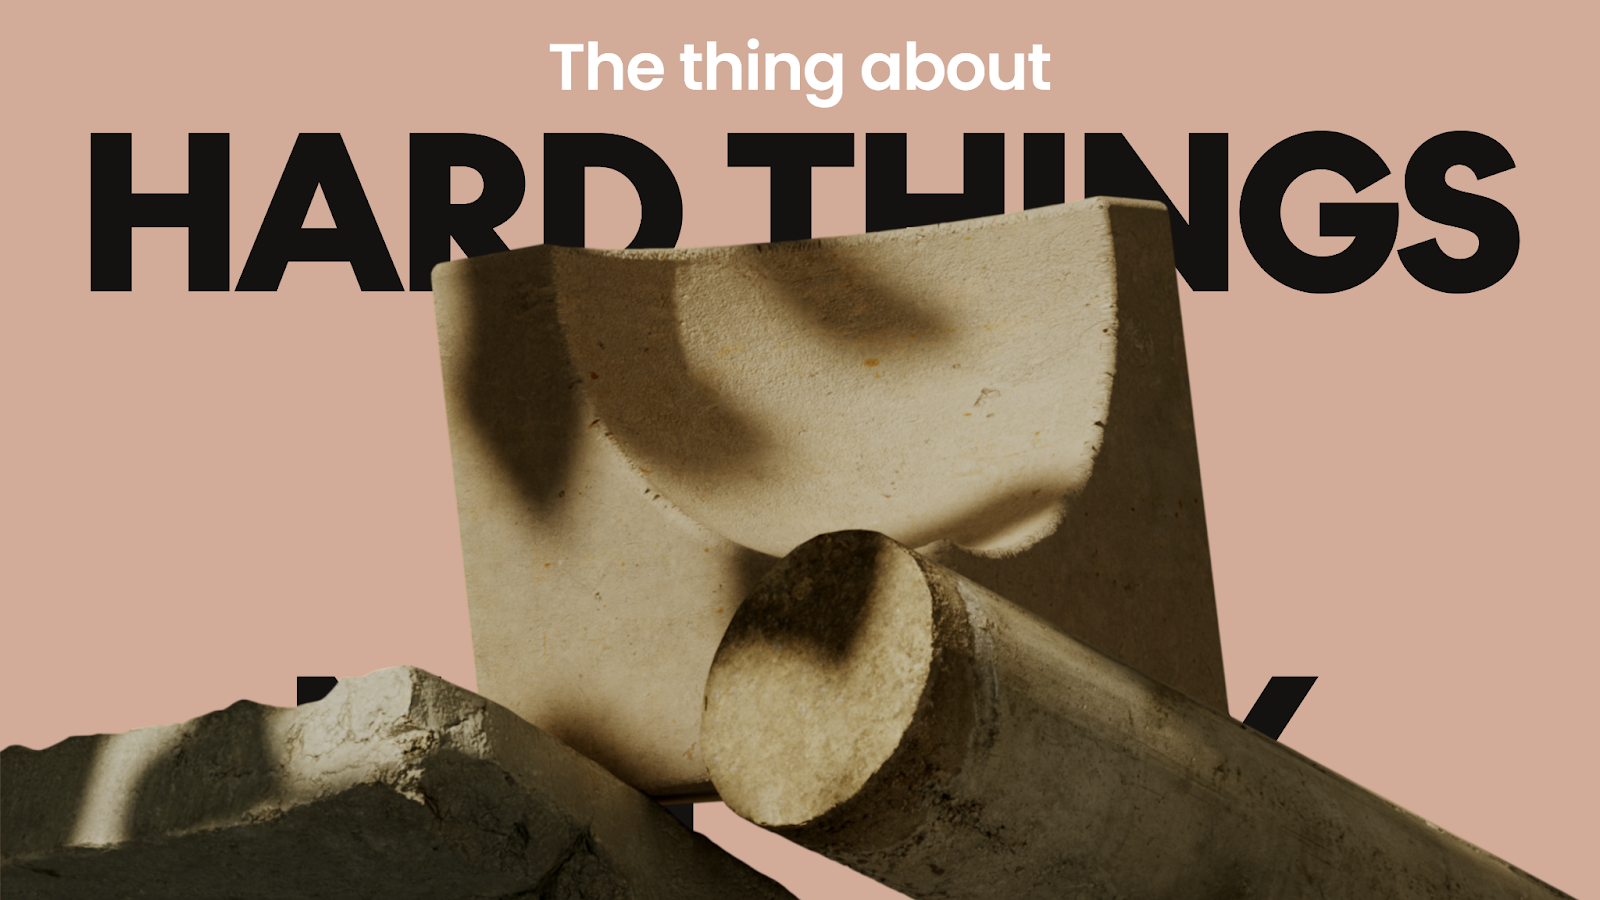 Bio-Concrete & the House of Hard Things Branding and Visual Identity